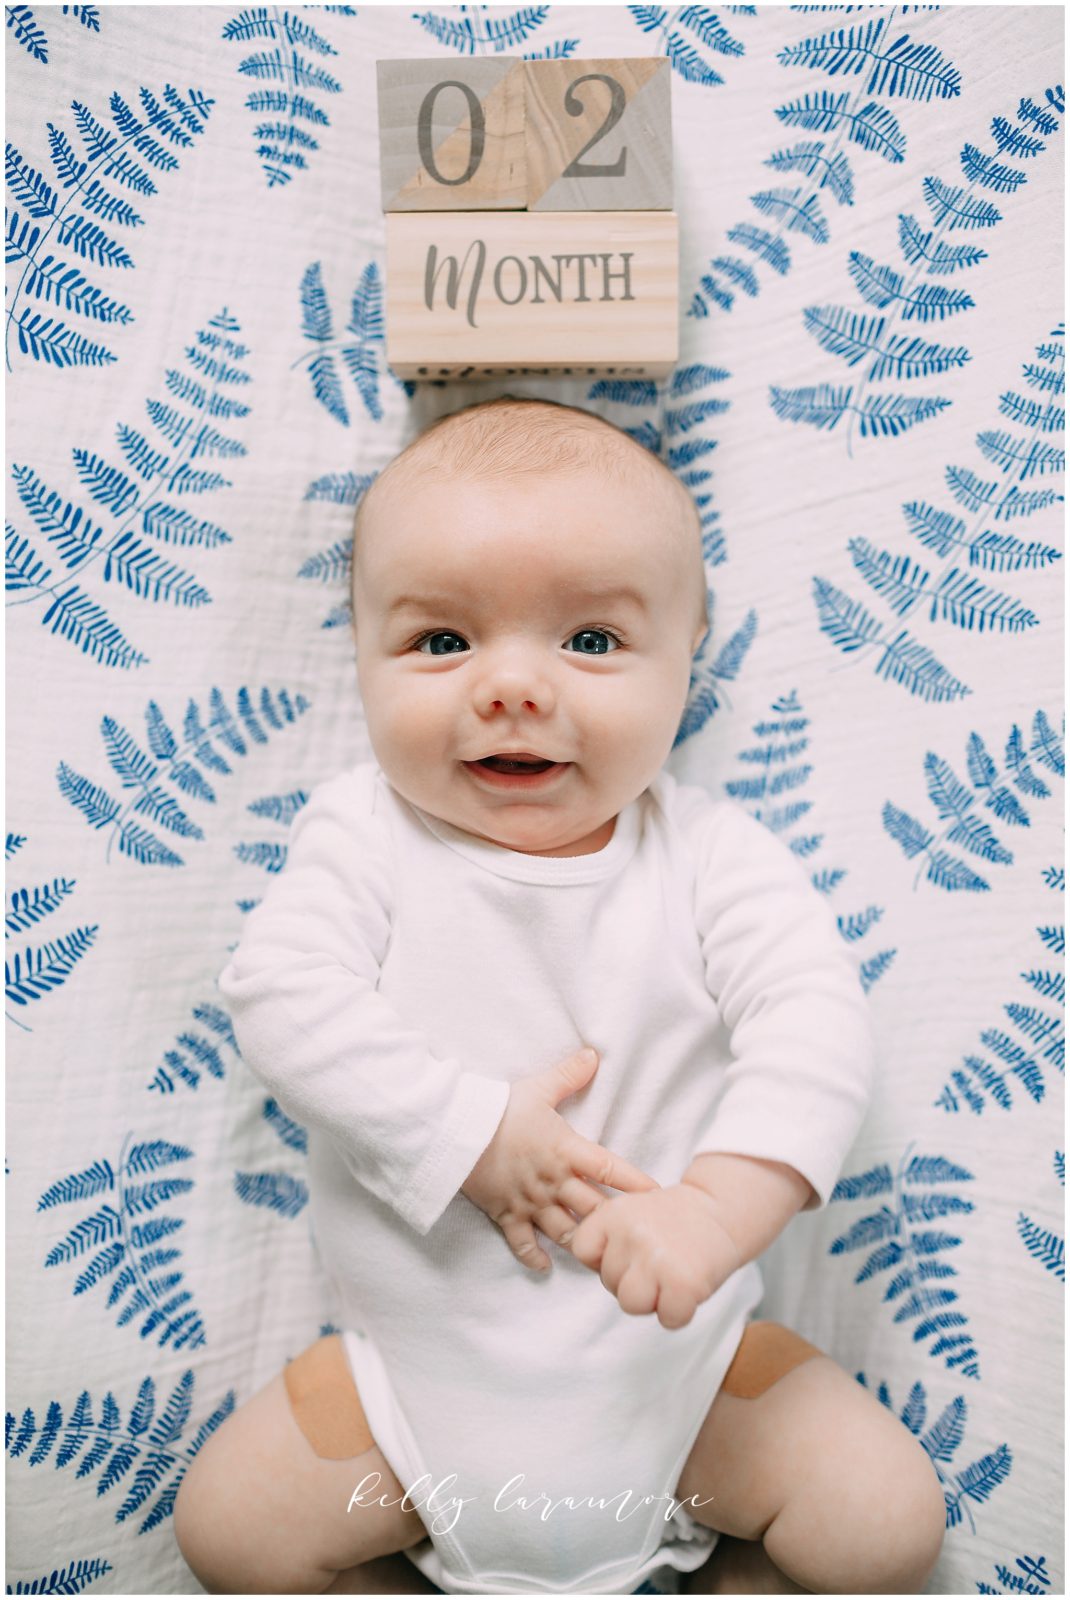 5 Helpful Tips When Capturing Monthly Baby Photos